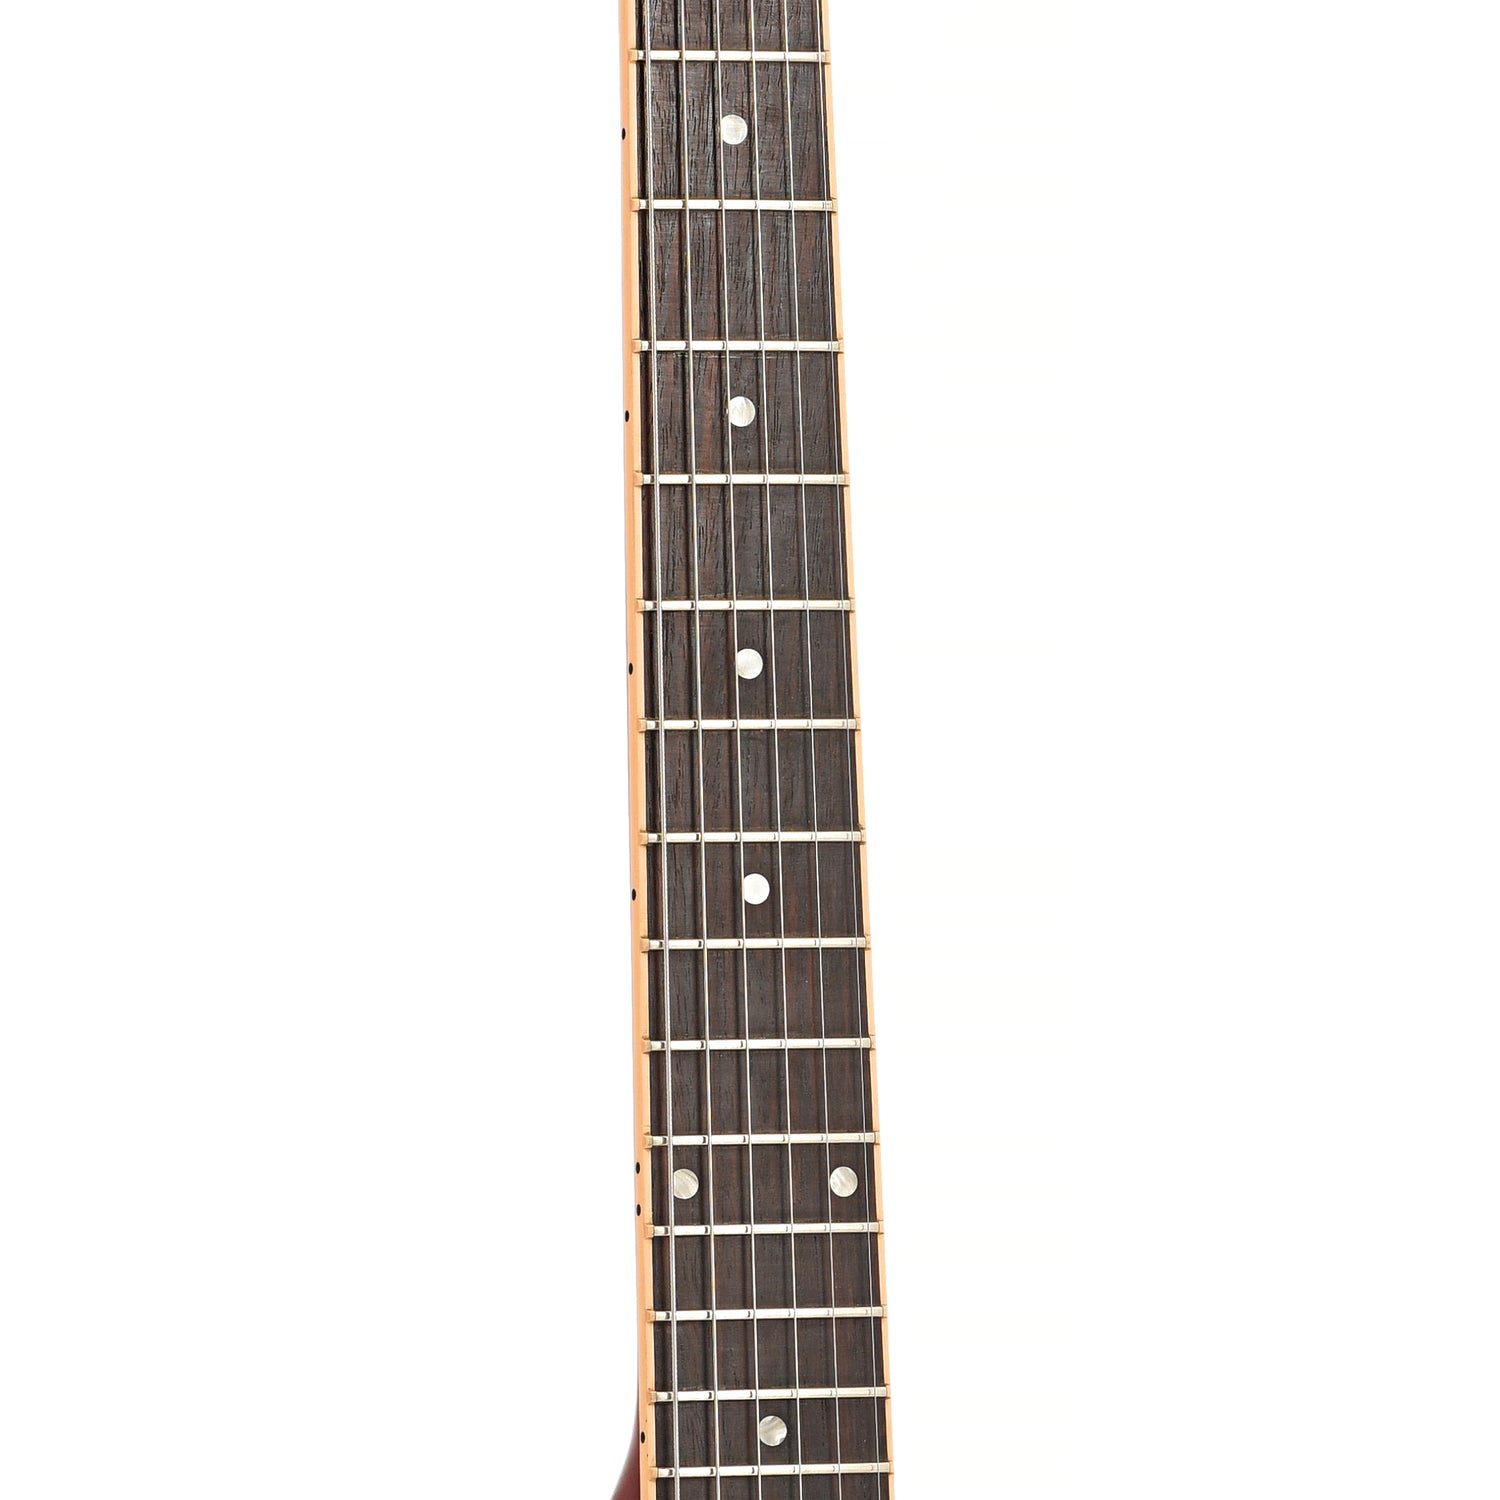 Fretboard of Gibson Les Paul Special